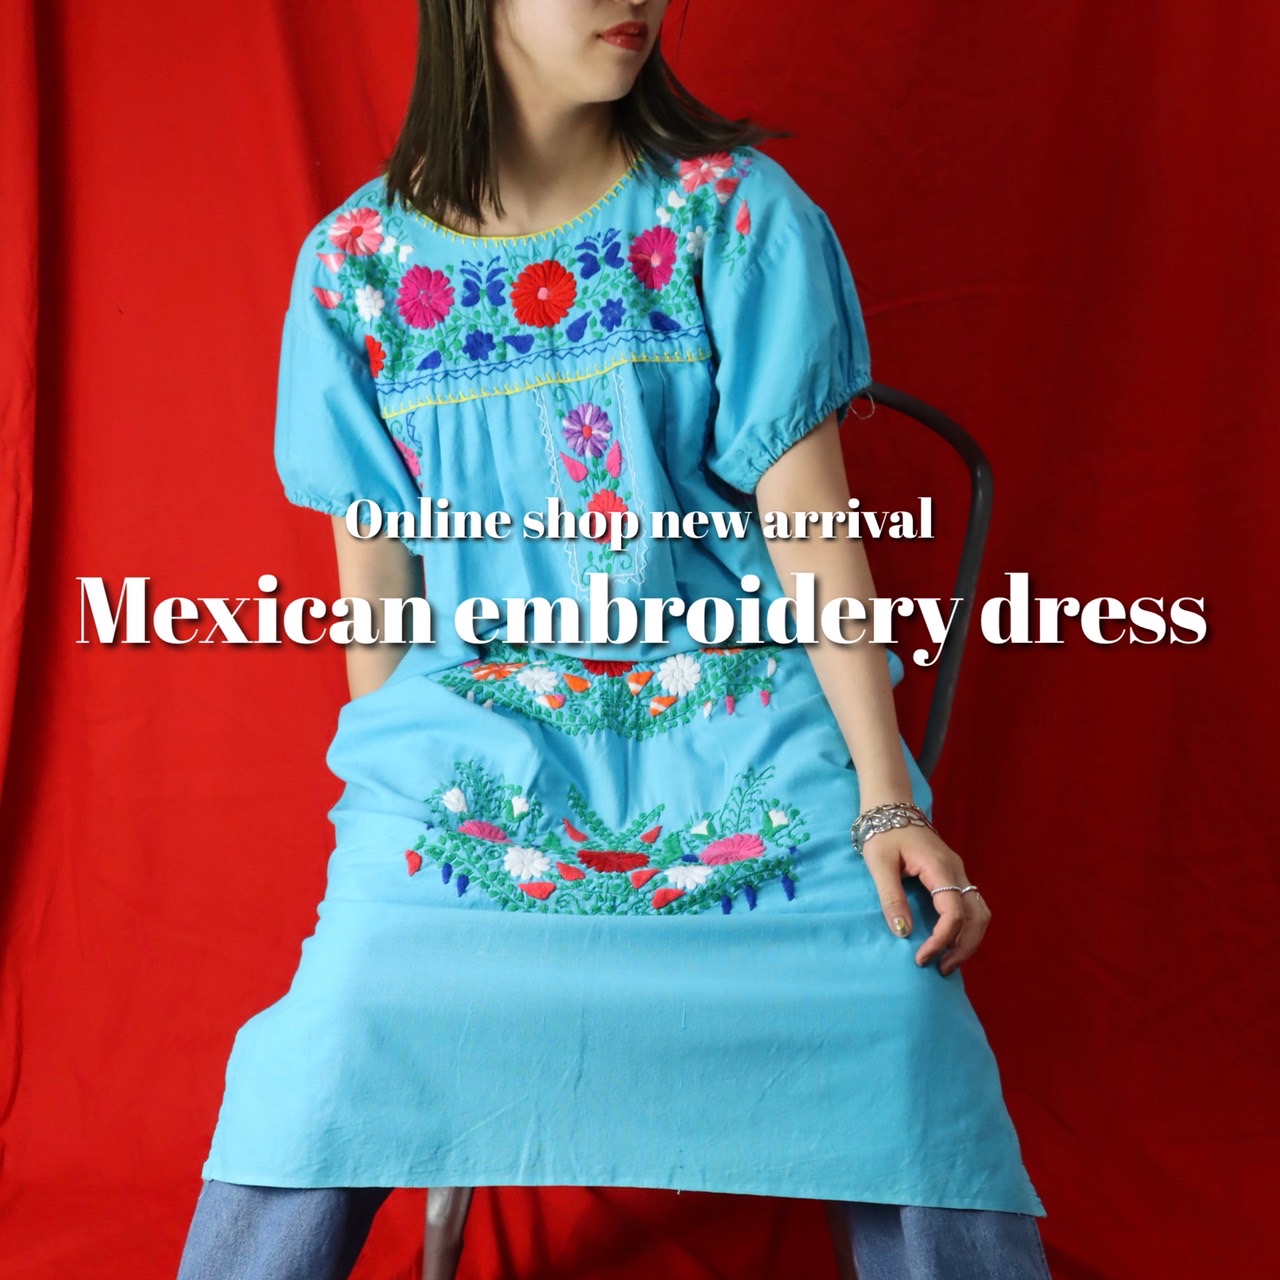 new arrival "Mexican embroidery dress"♡